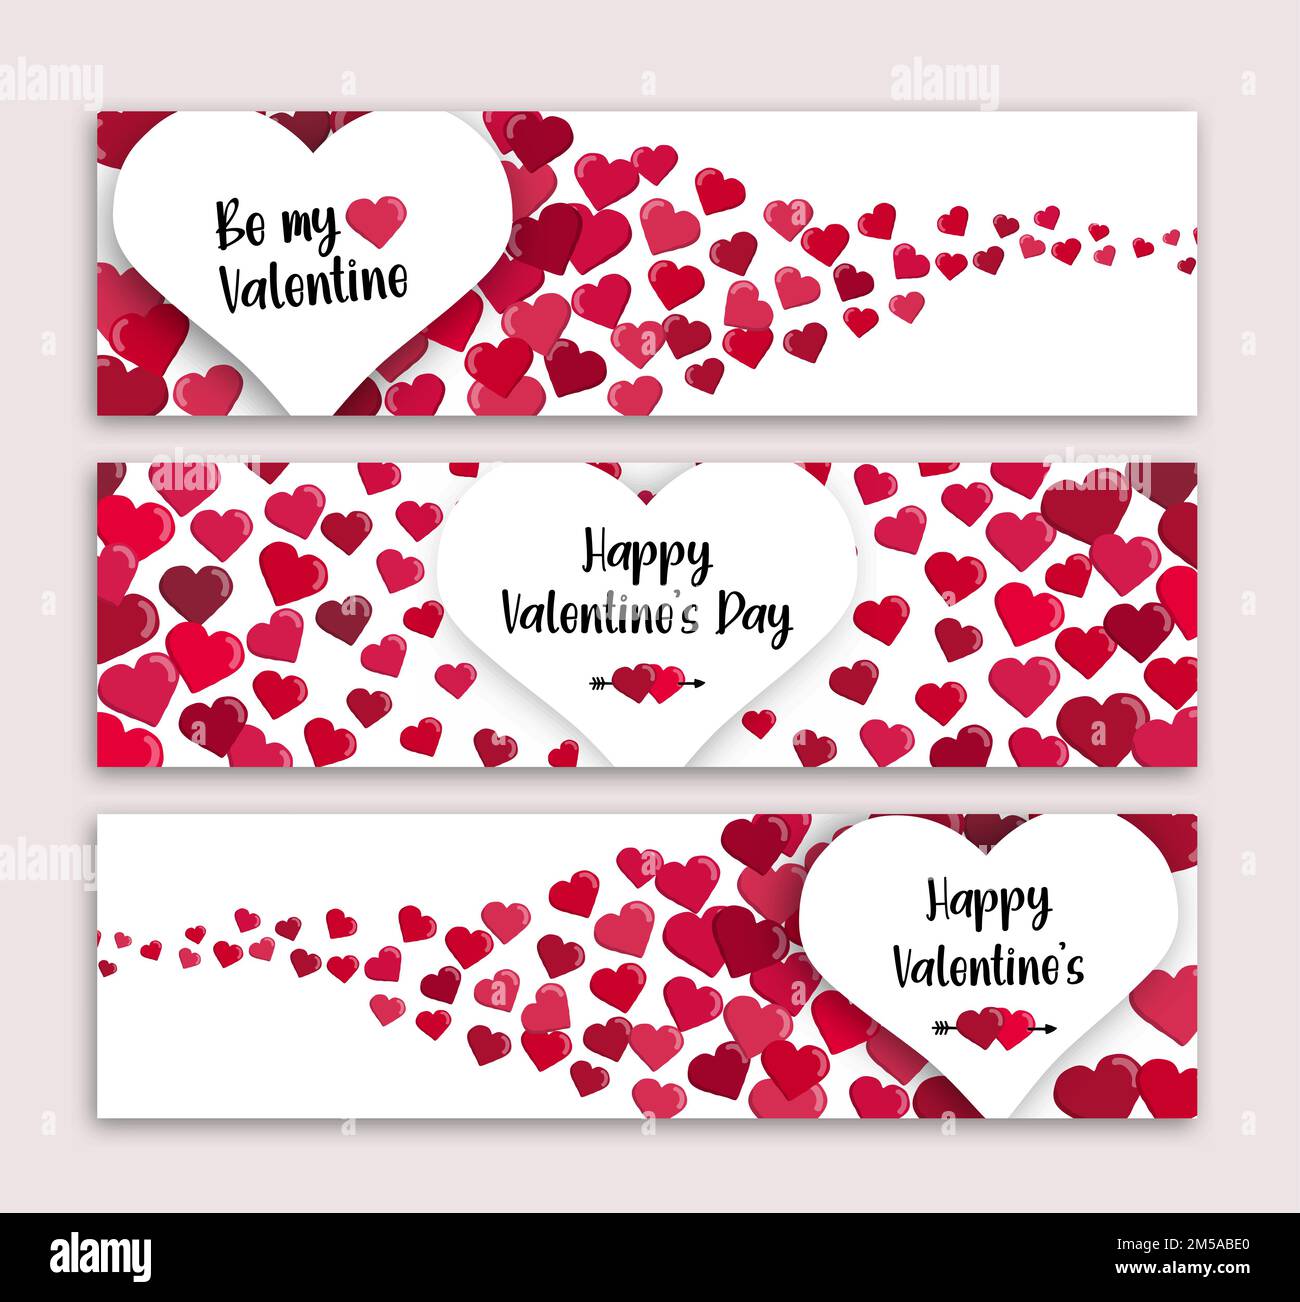 Valentine's Day web banner set. Red heart shape cartoon decoration with cute love typography quotes for romantic february 14 holiday event. Stock Vector